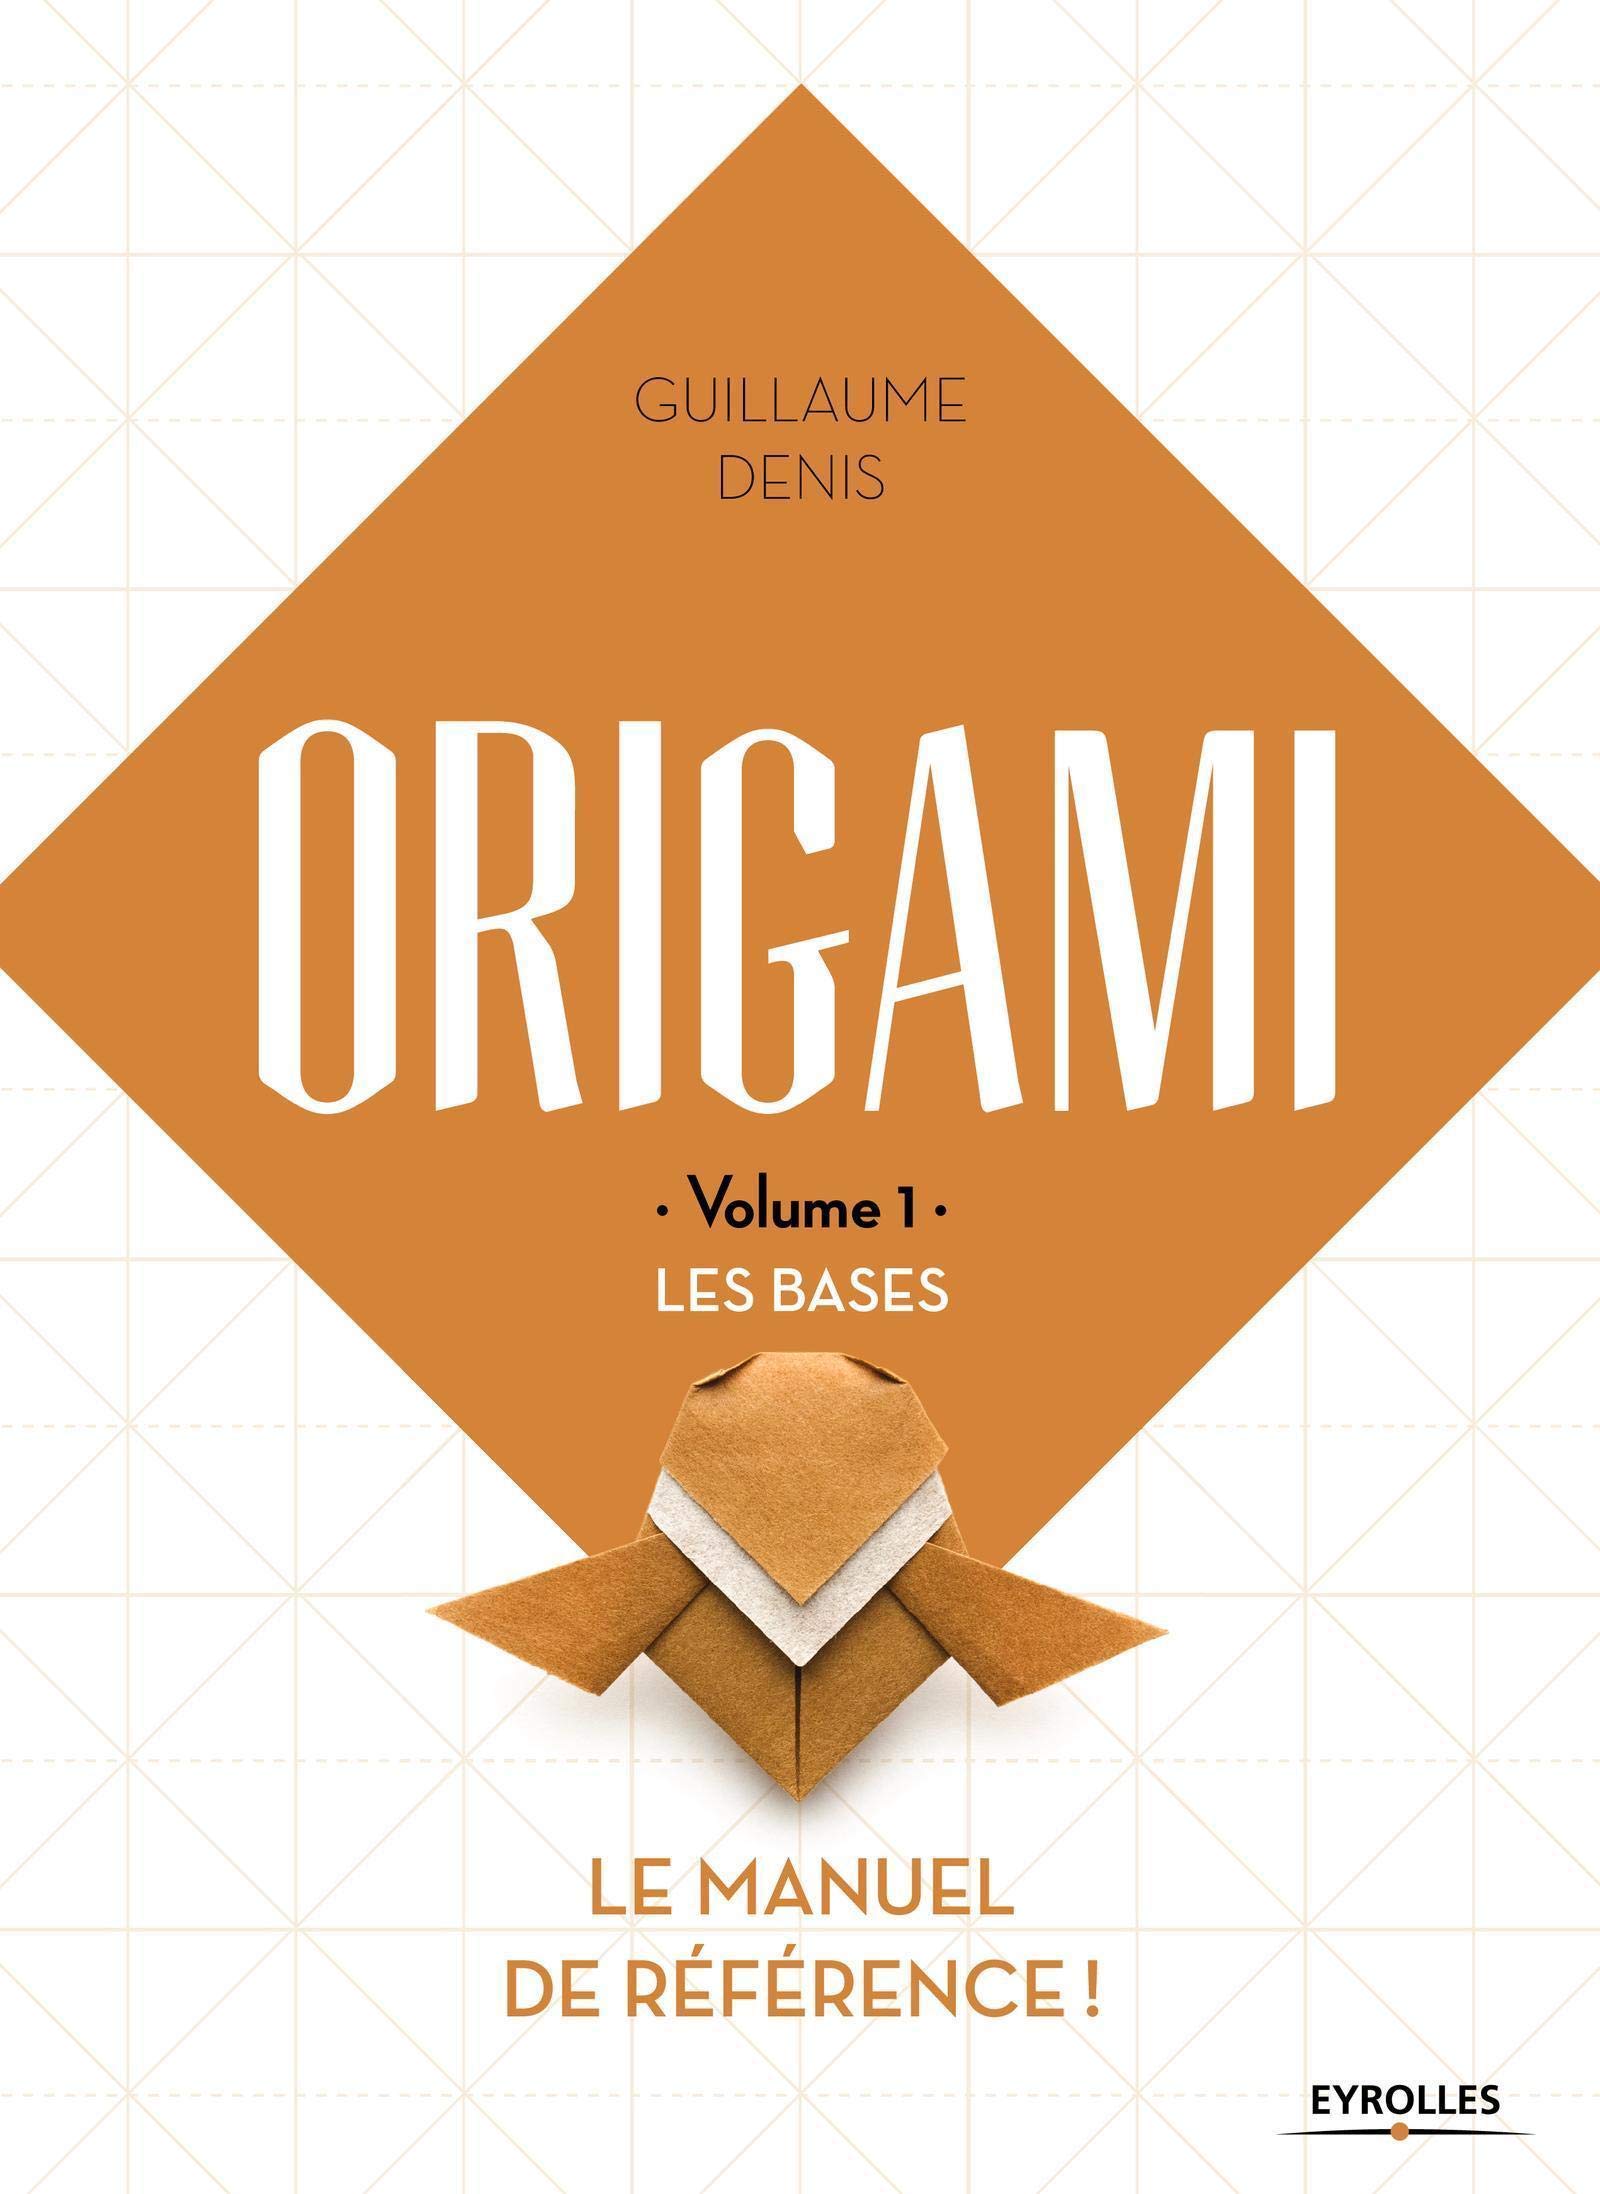 ORIGAMI - Volume 1 - LES BASES : page 192.